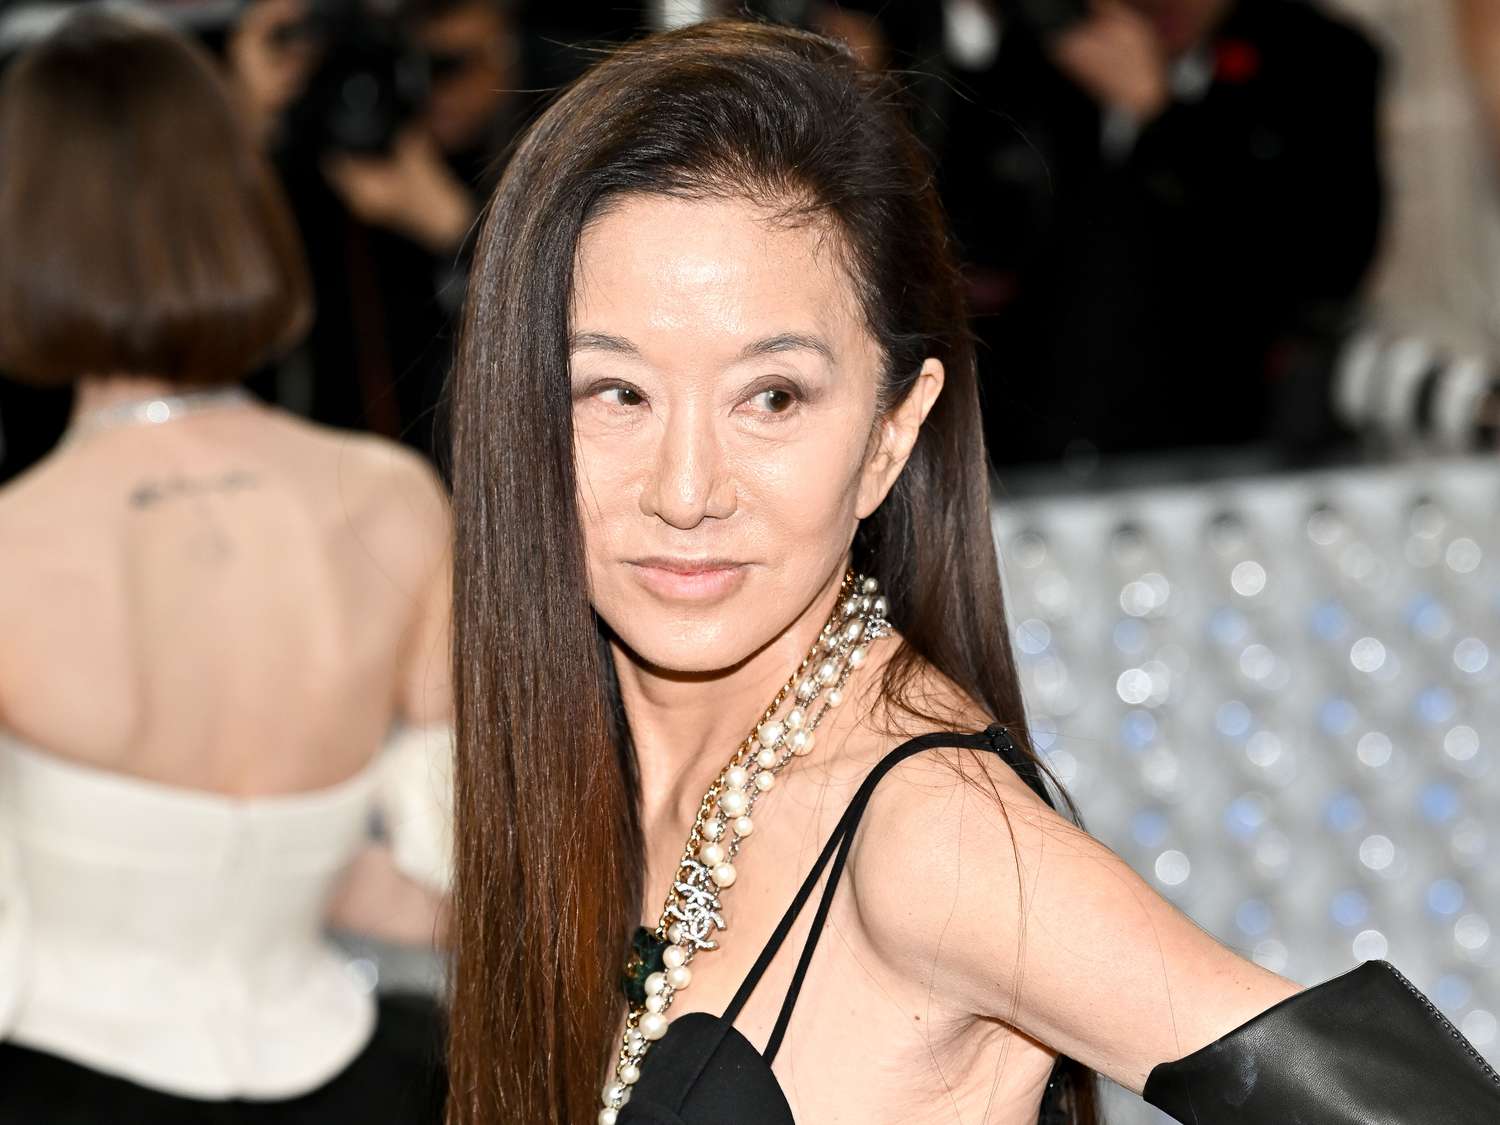 36 Facts About Vera Wang - Facts.net